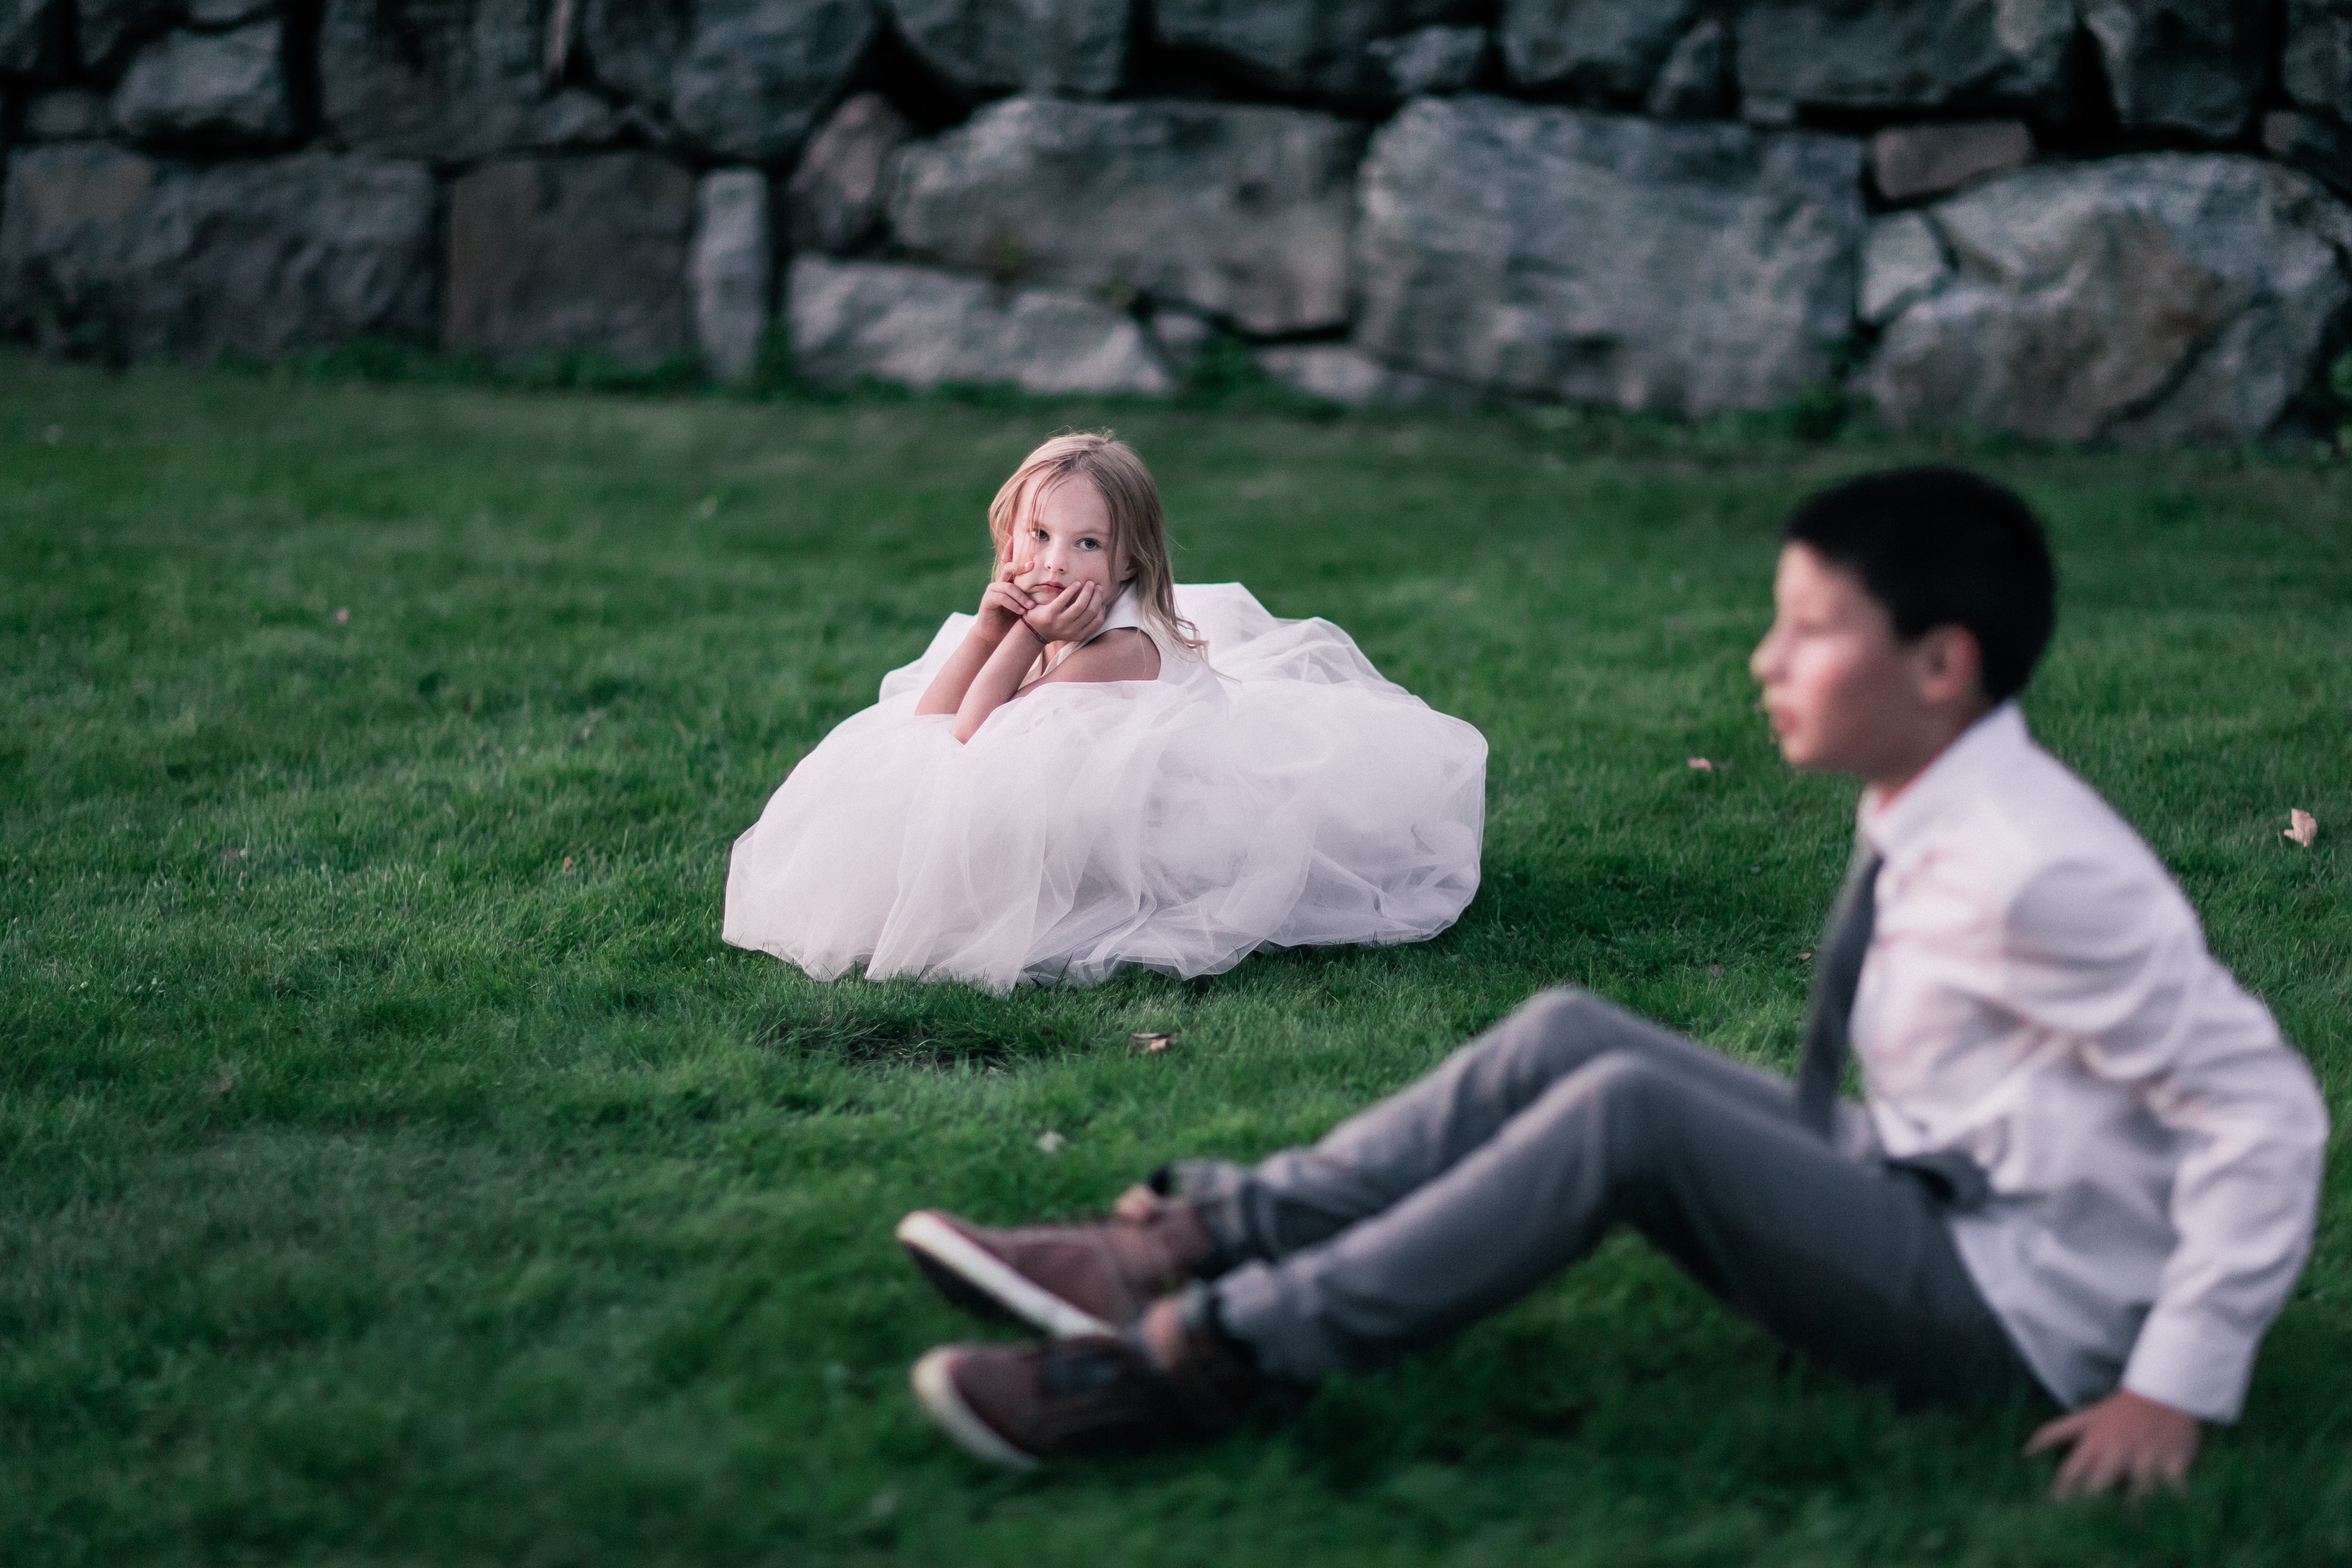 Cute kid looking at a boy in a wedding dress with no event babysitter around